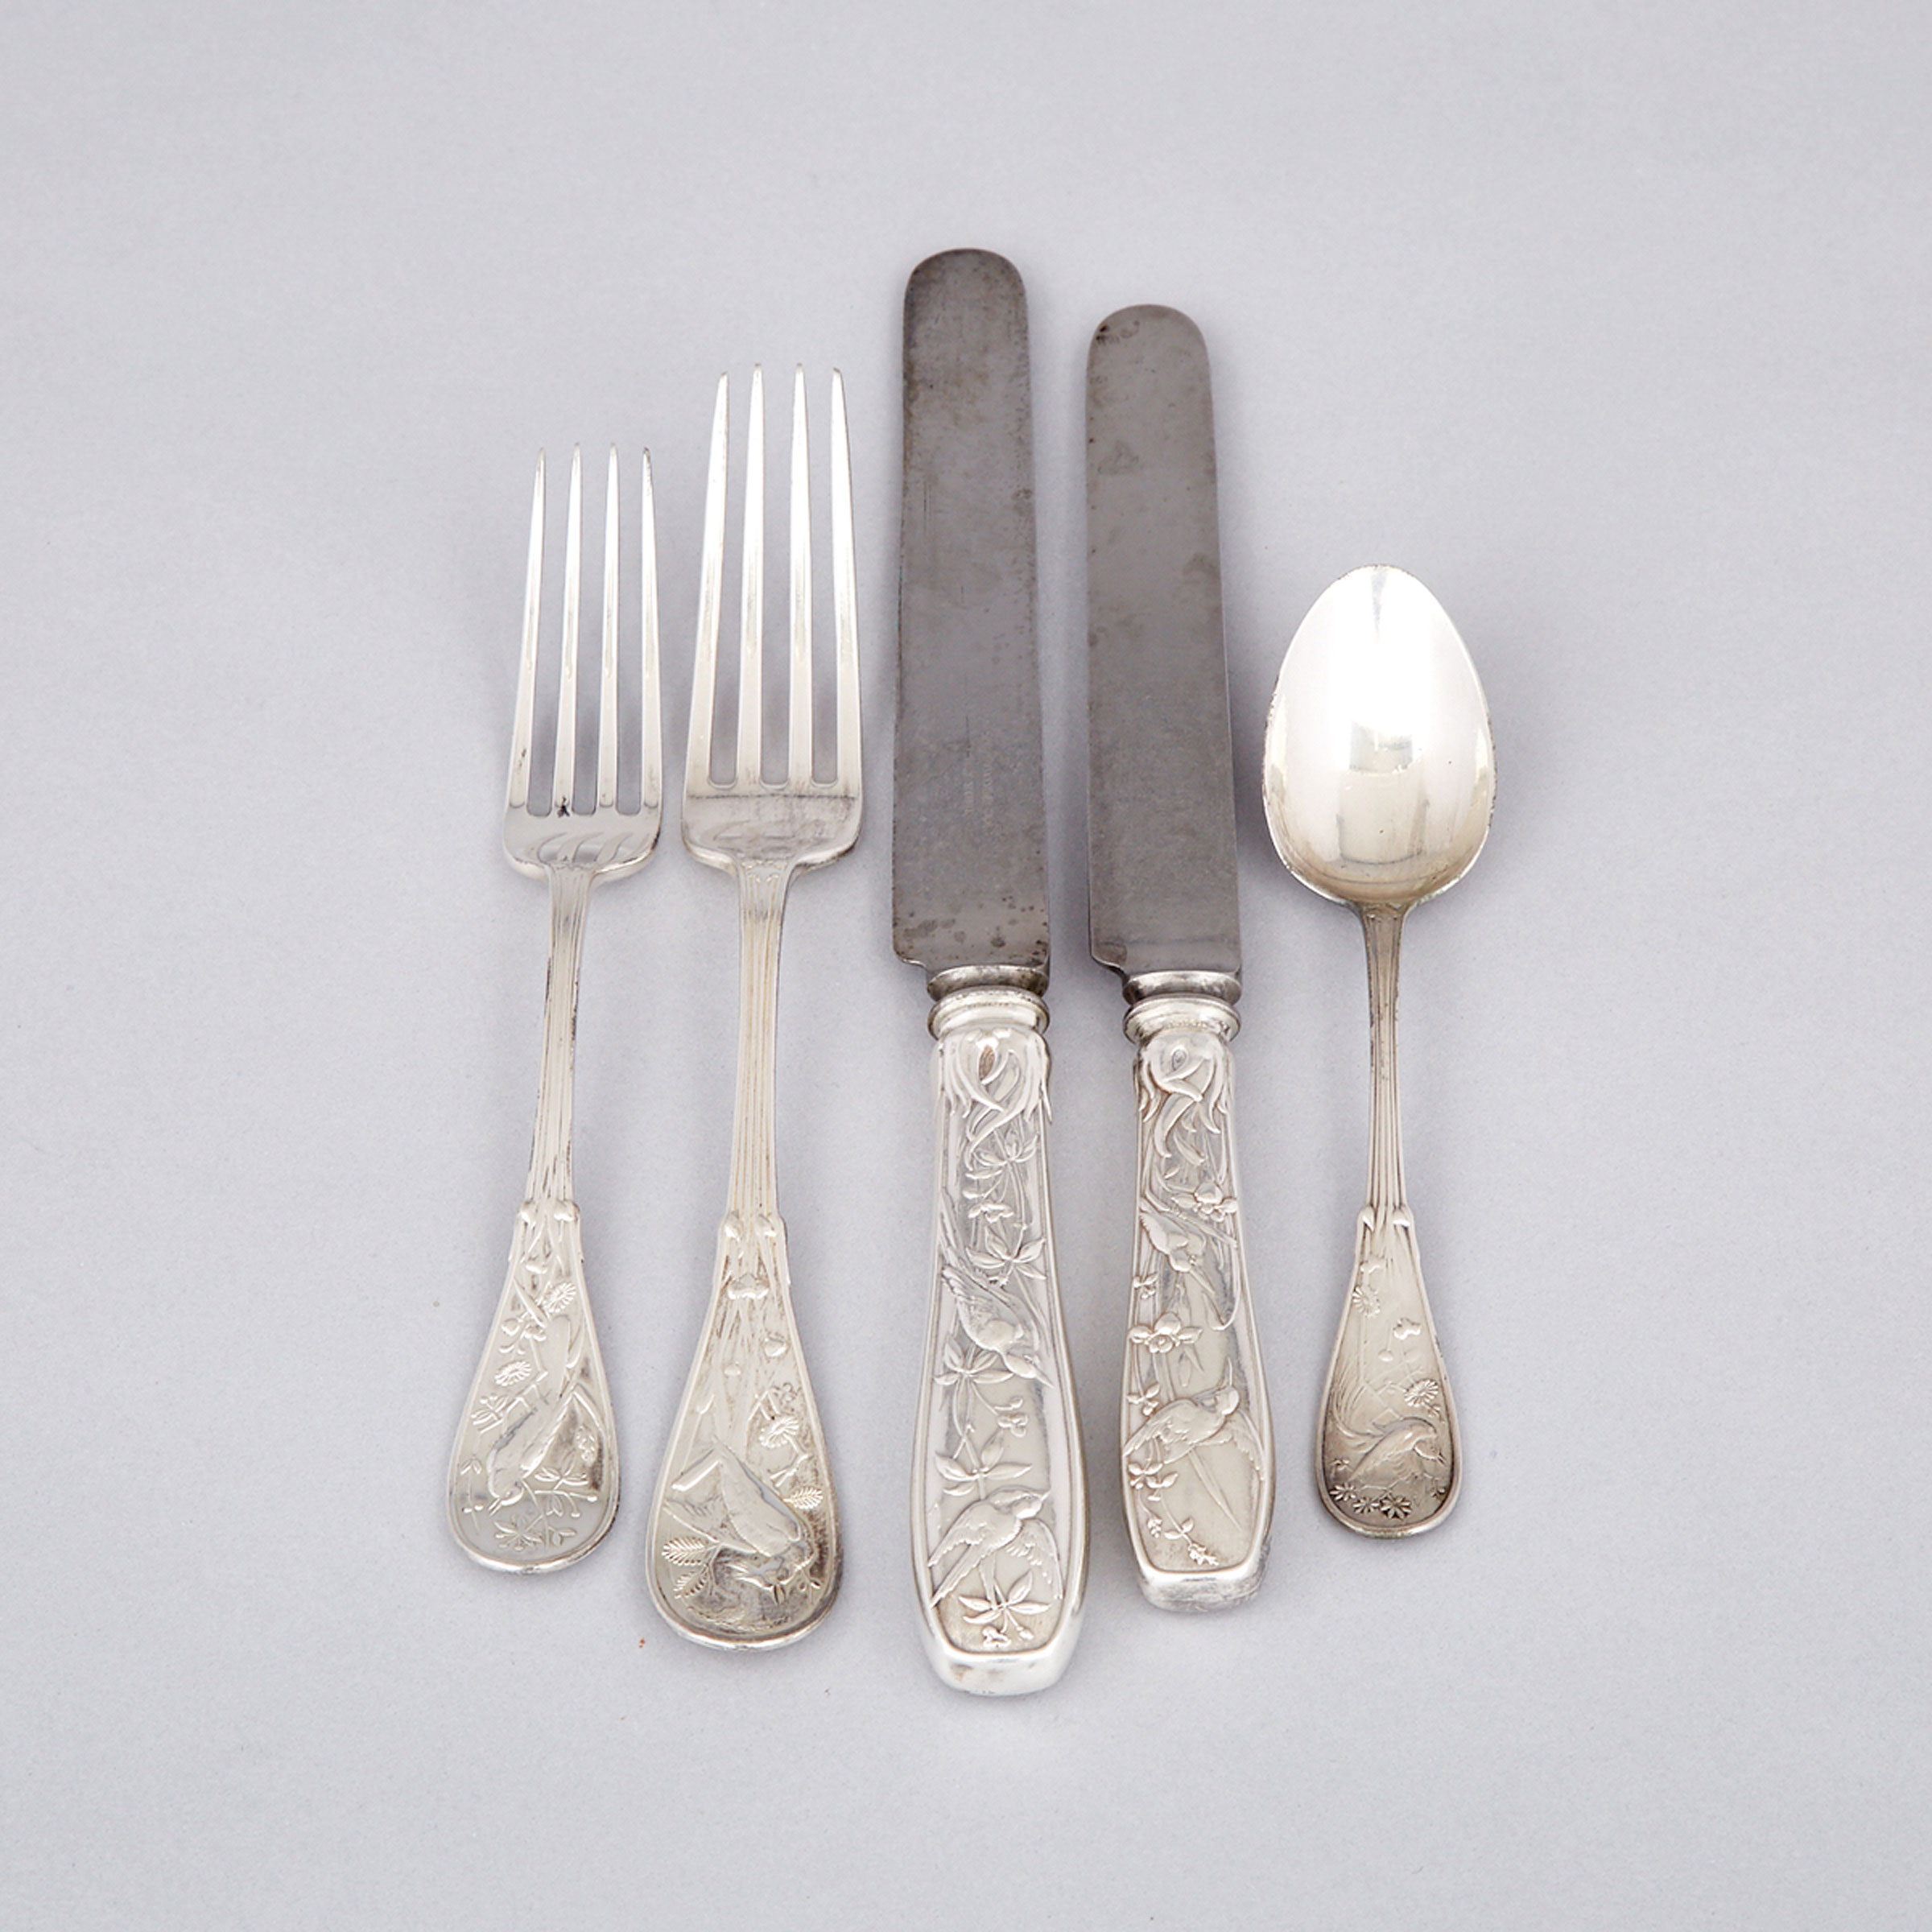 American Silver ‘Japanese’ Pattern Flatware Service, Tiffany & Co., New York, N.Y., late 19th century